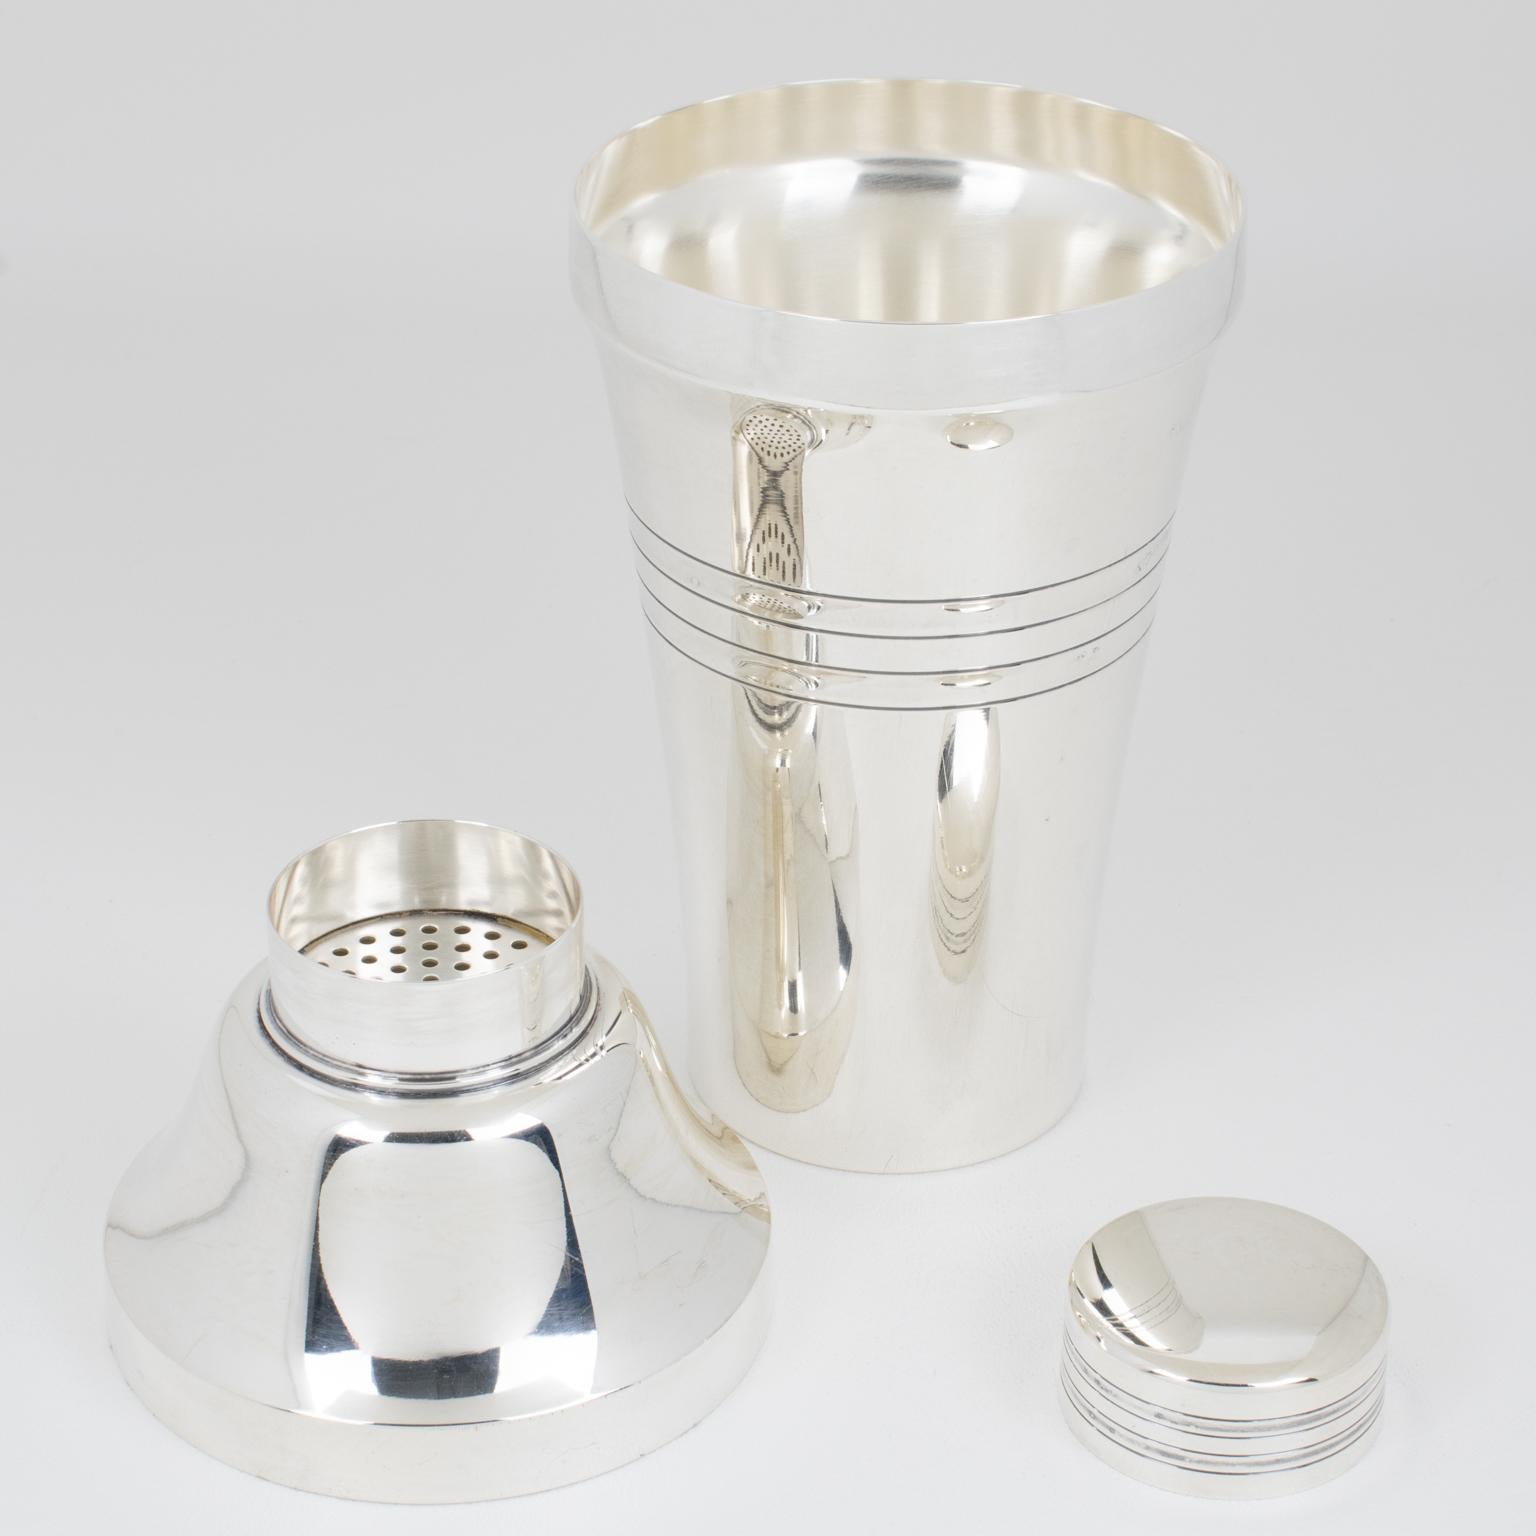 This refined three-sectioned cocktail shaker was crafted by the renowned silversmith Saint Medard in Paris for the Le Chardon Collection. The beautiful Art Deco design features a geometric pattern and is adorned with a removable cap and strainer.